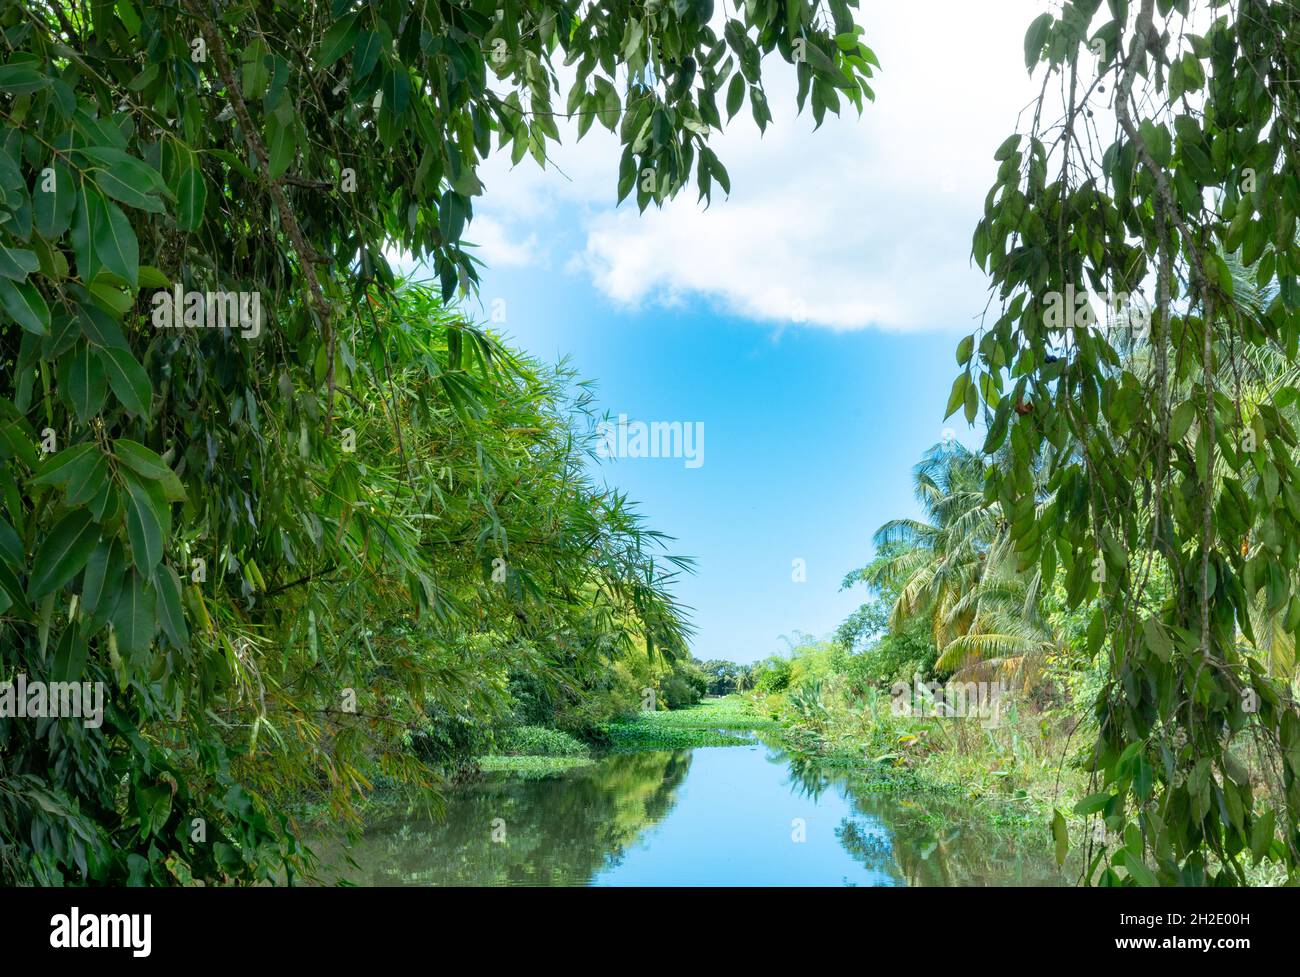 River located on the Caribbean island of Trinidad surrounded by tropical foliage reflected in the calm waters framed by leaves. Stock Photo